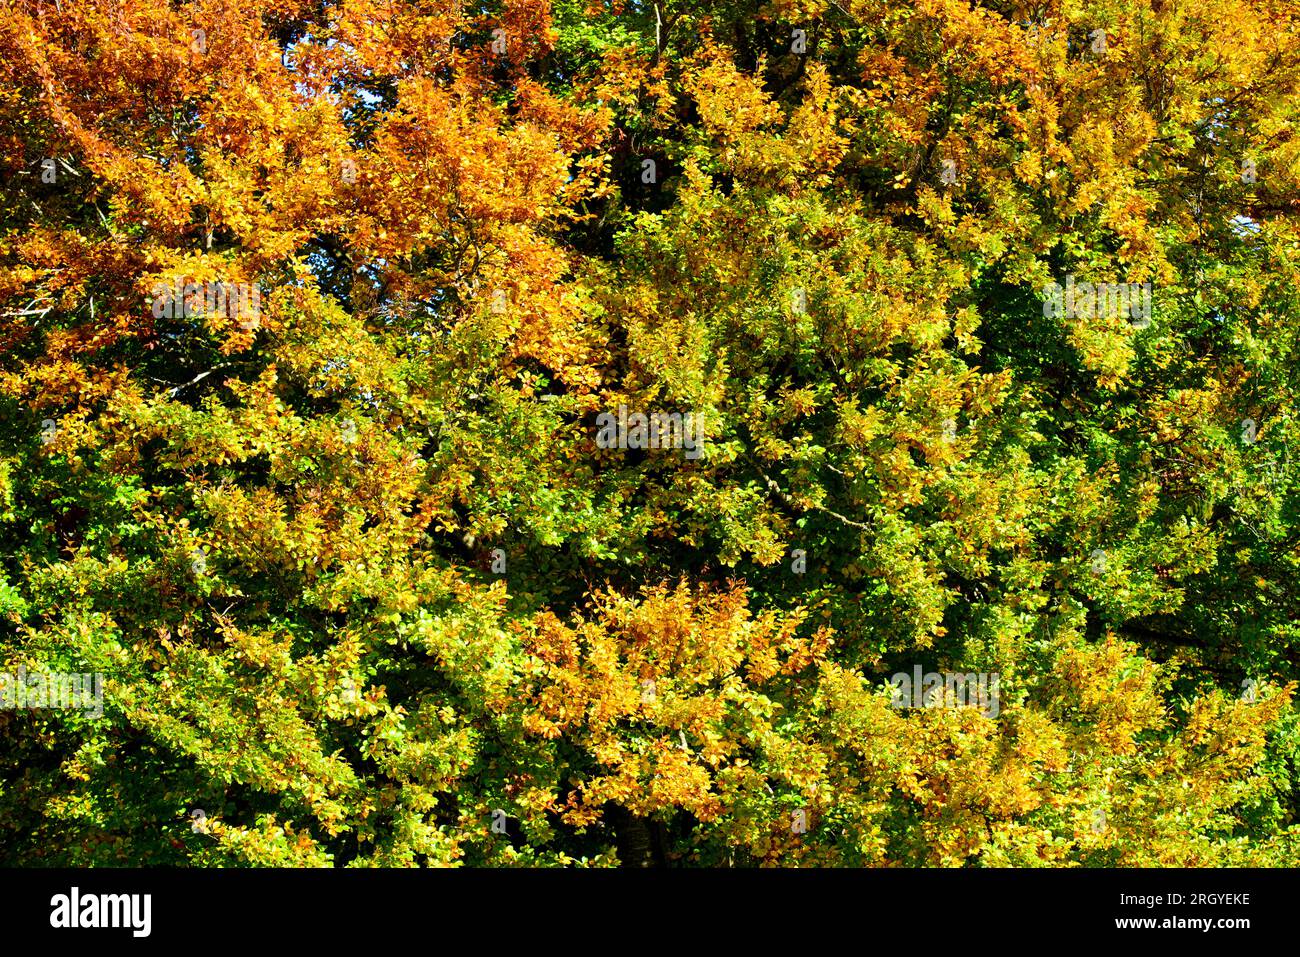 panoramic view to rural landscape with vibrant colored leaves on trees Stock Photo